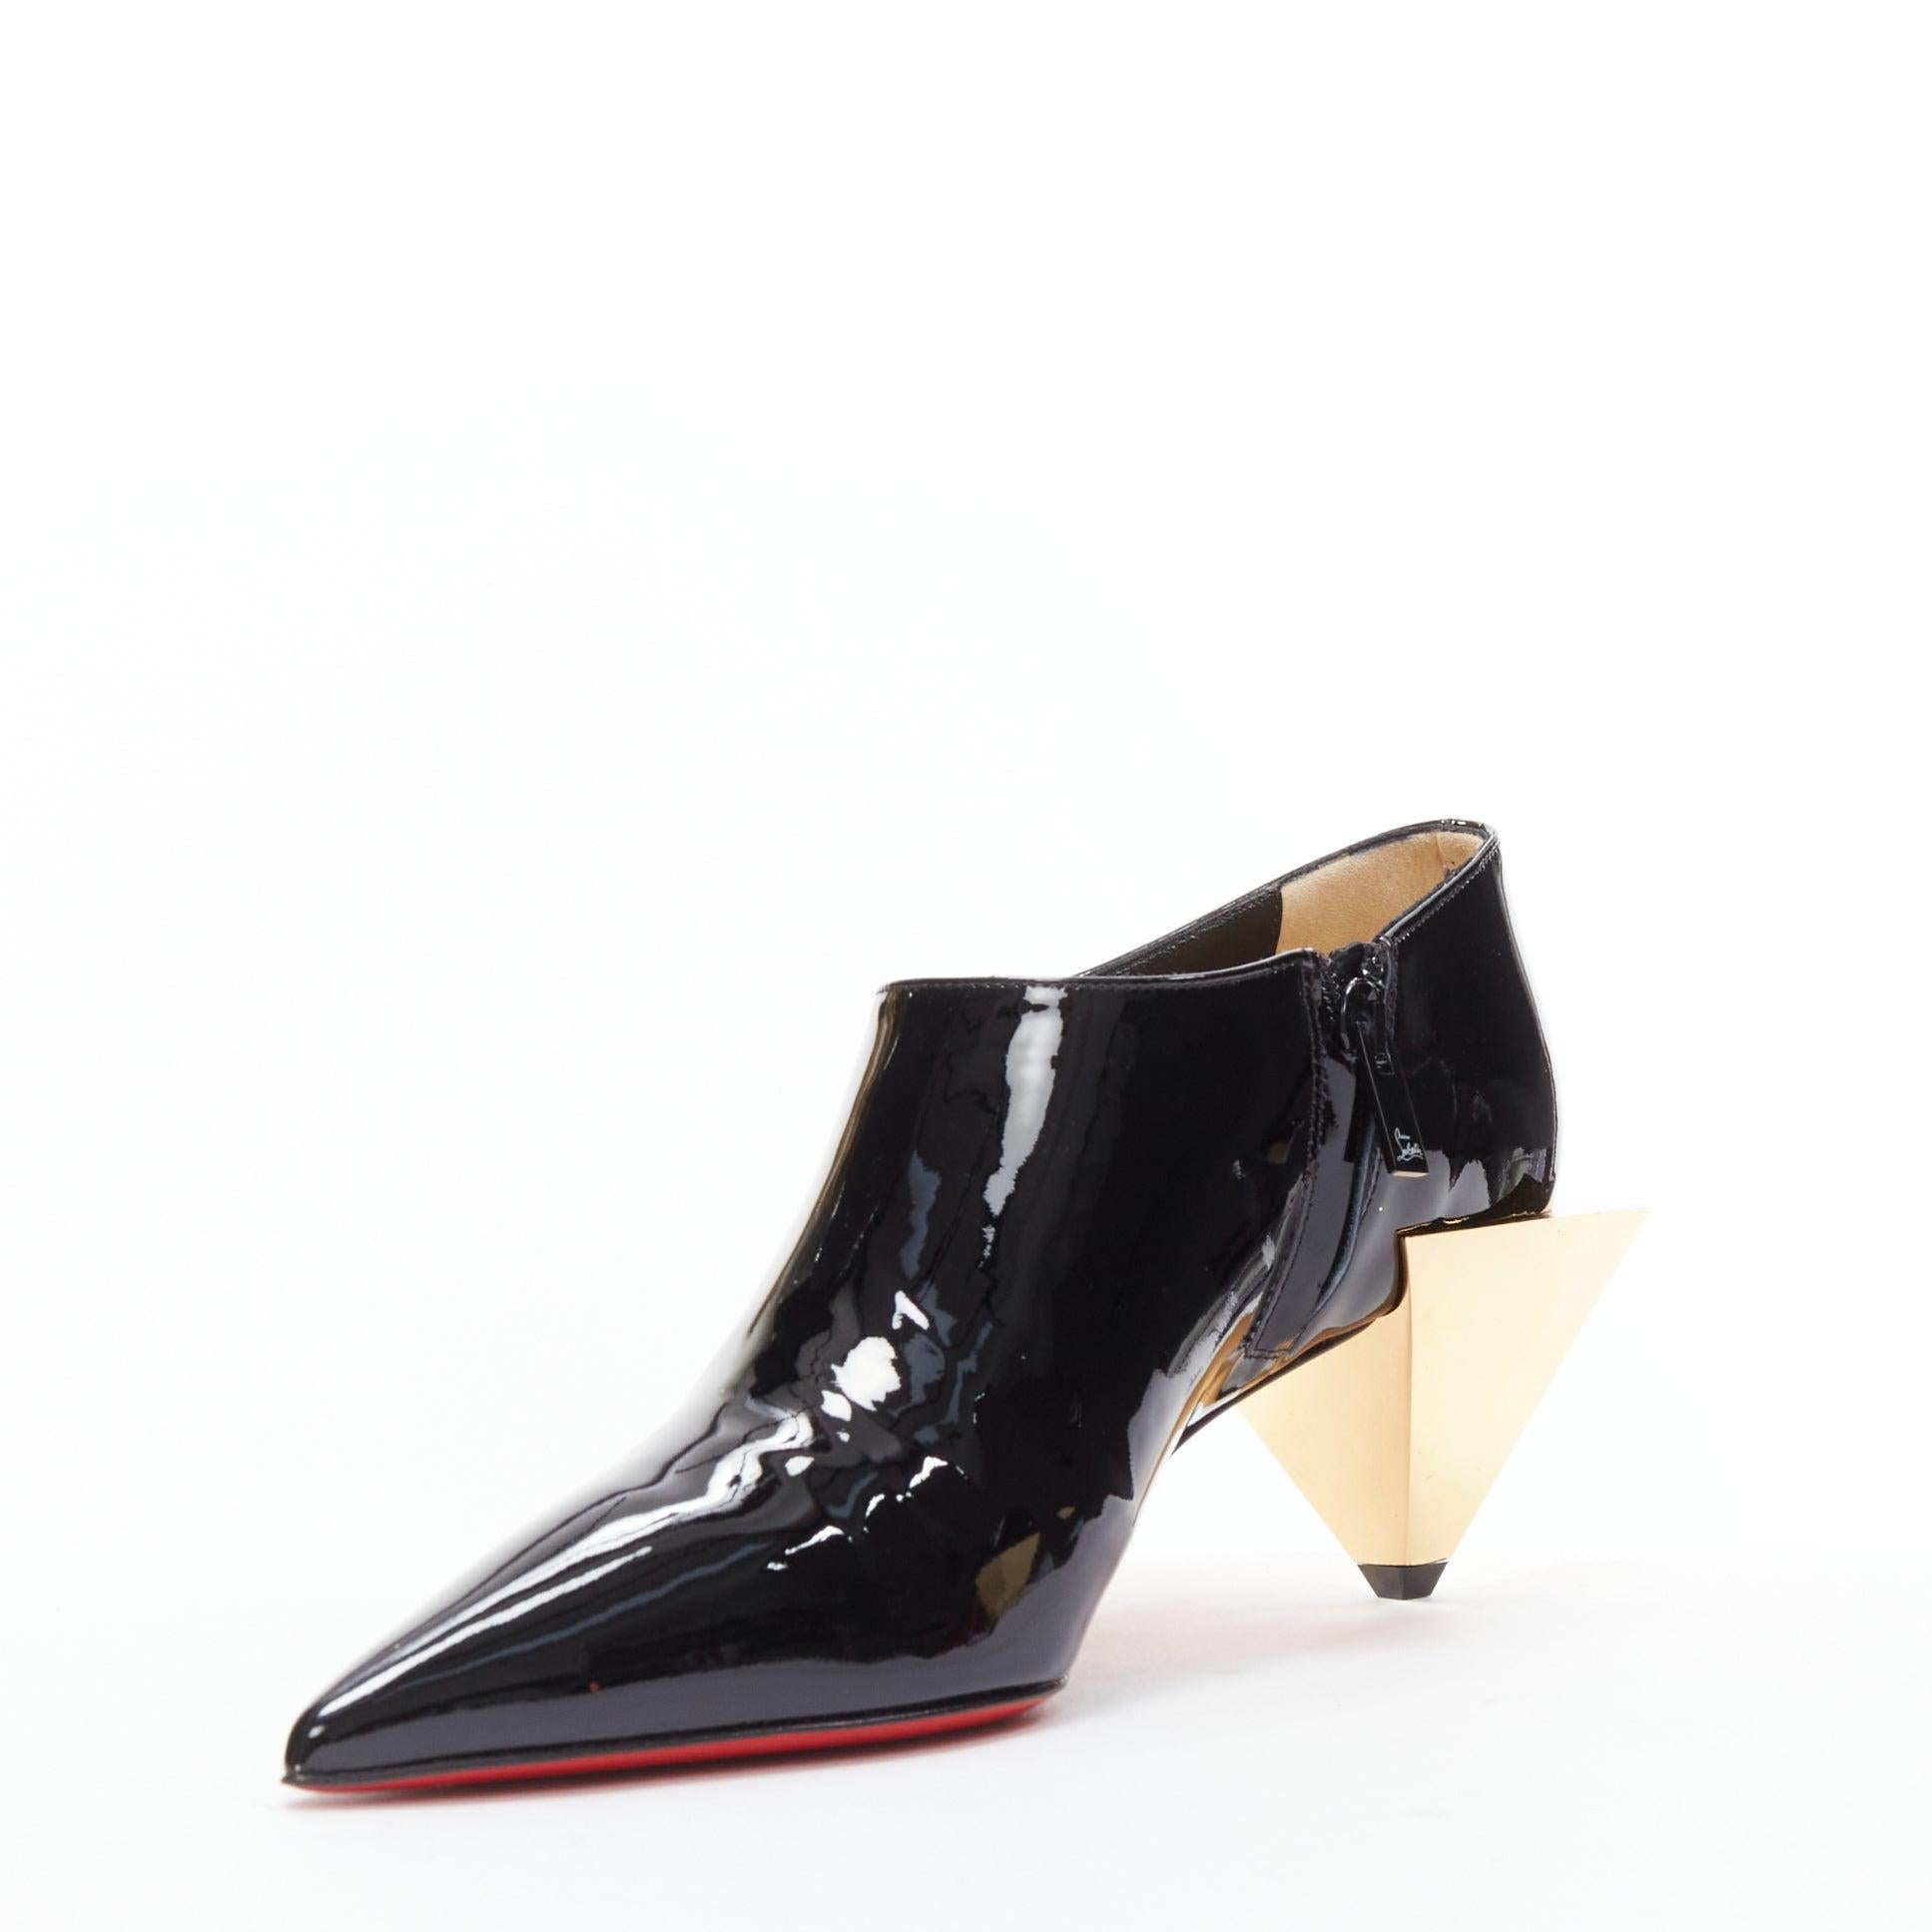 CHRISTIAN LOUBOUTIN Xilobooties 55 gold pyramid heel black patent pump EU38 In Excellent Condition For Sale In Hong Kong, NT